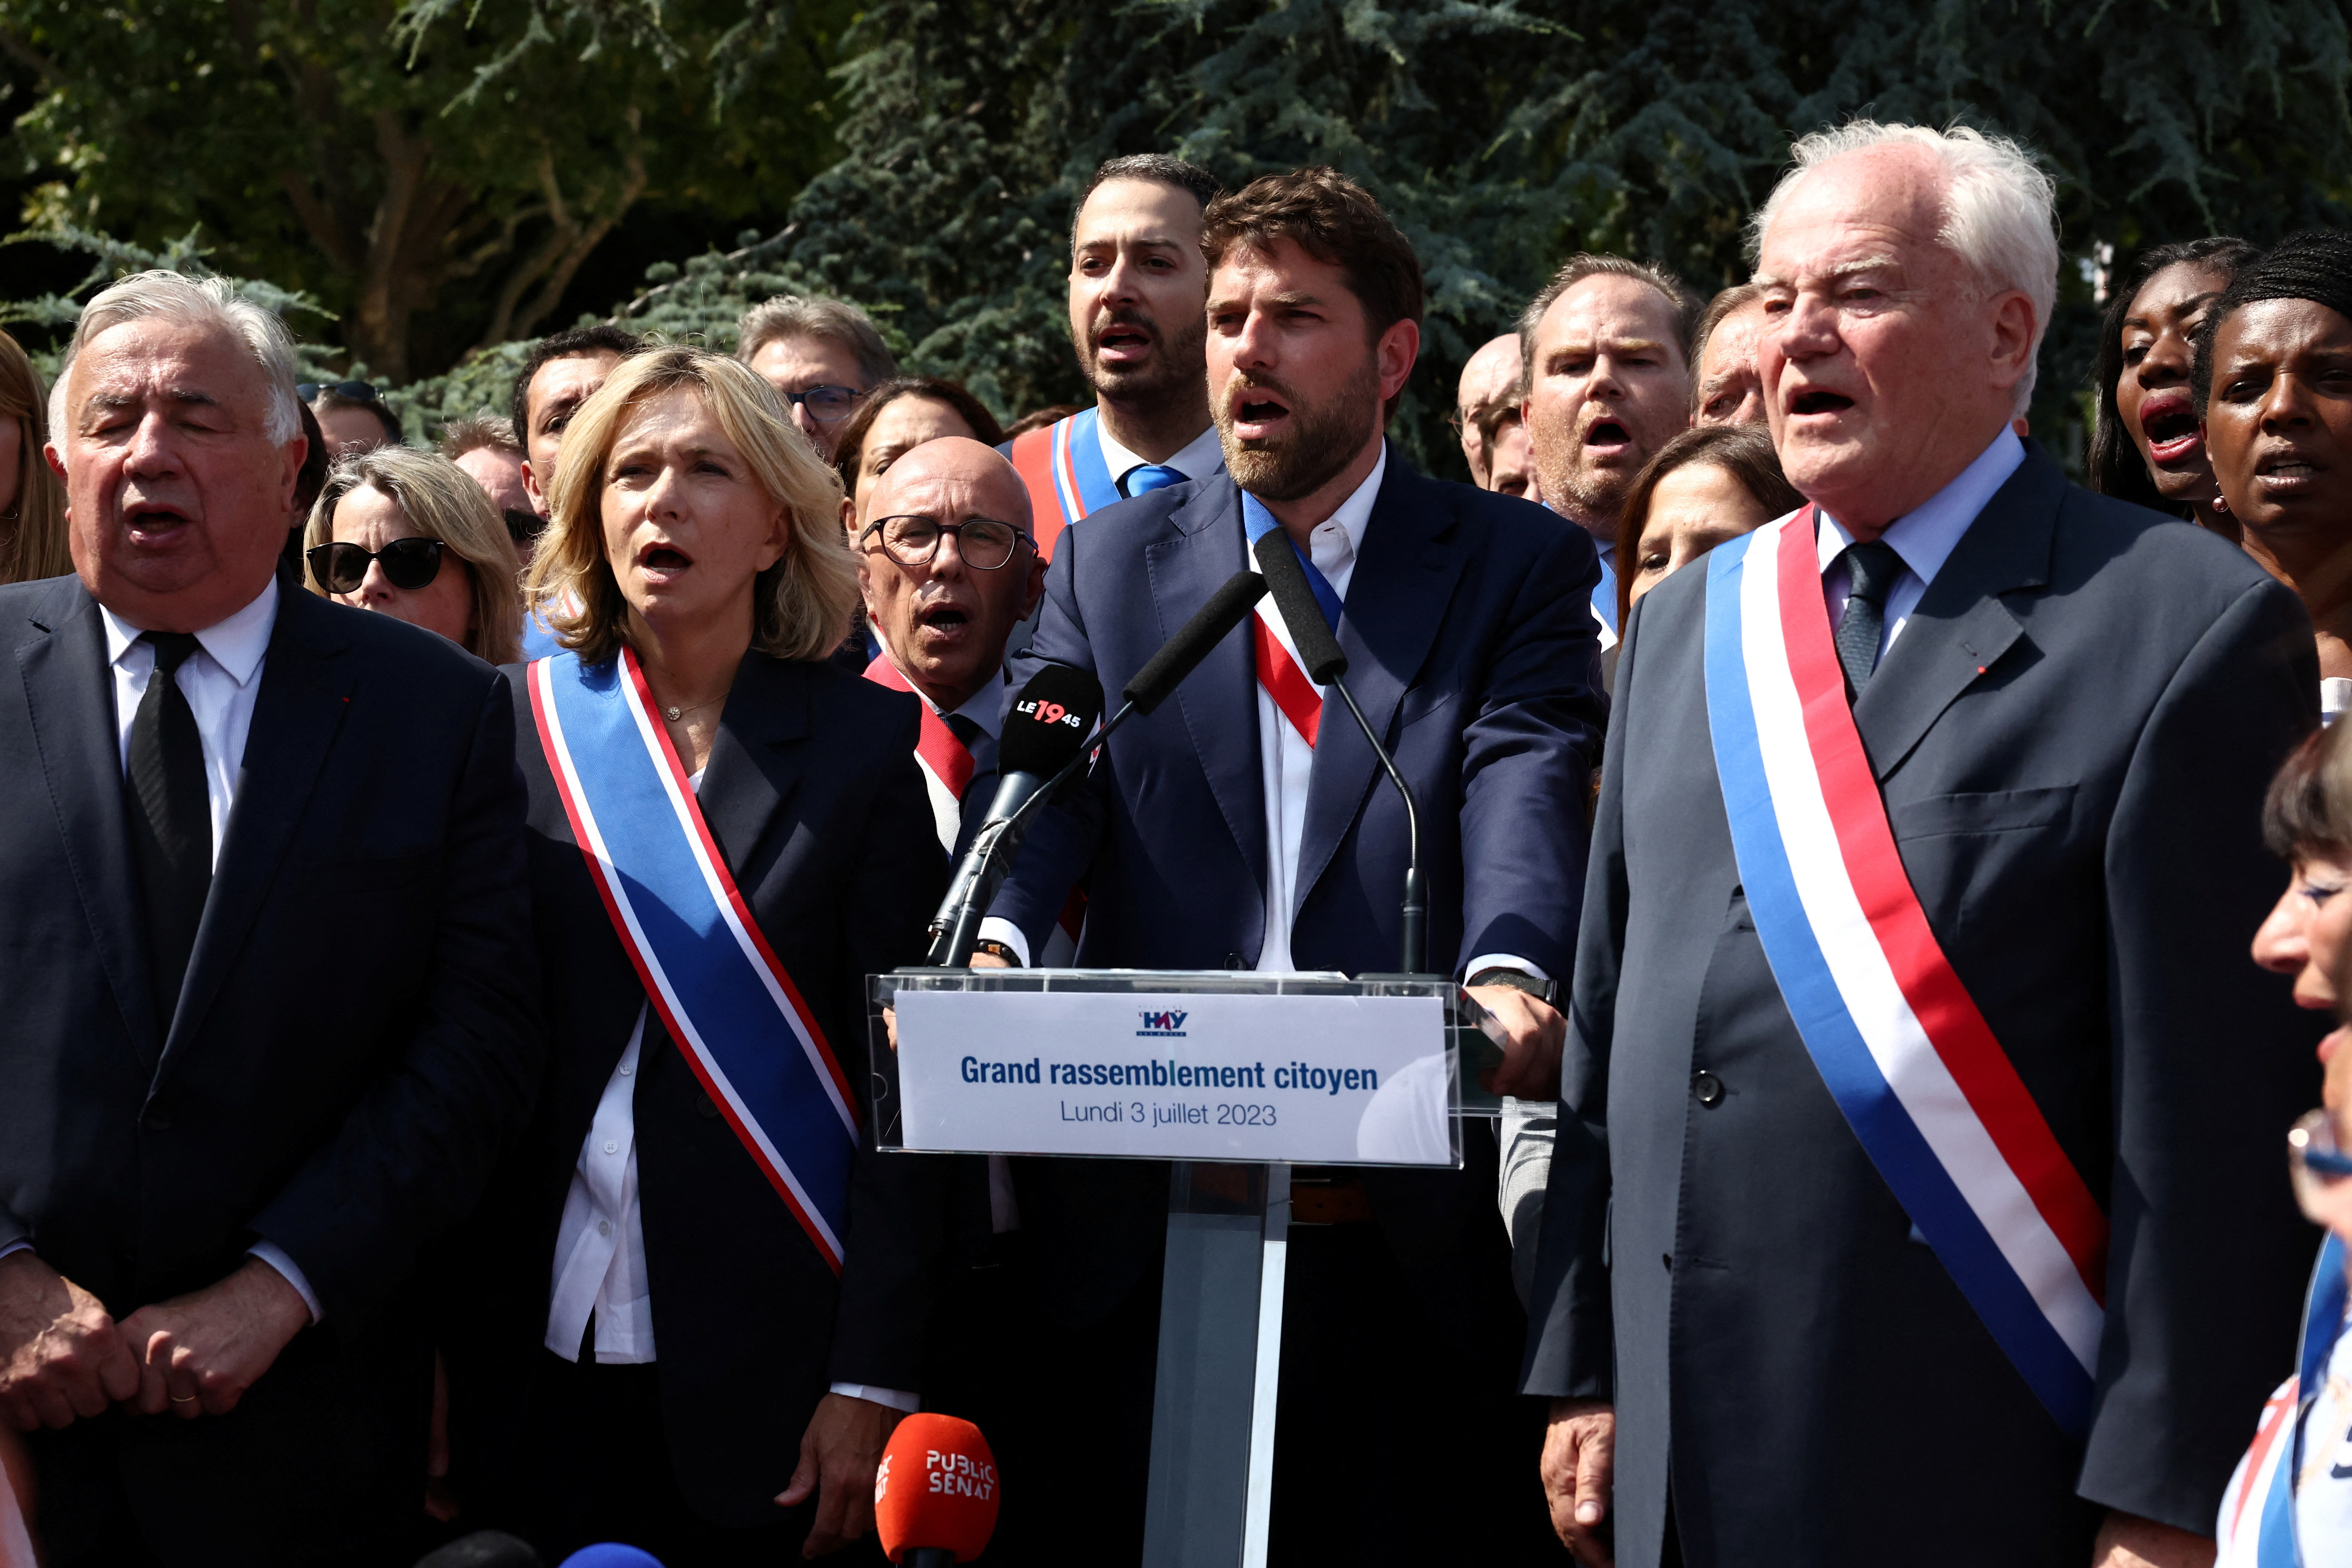 Gathering in support of elected officials after rioters' attack on Paris suburb town mayor's home